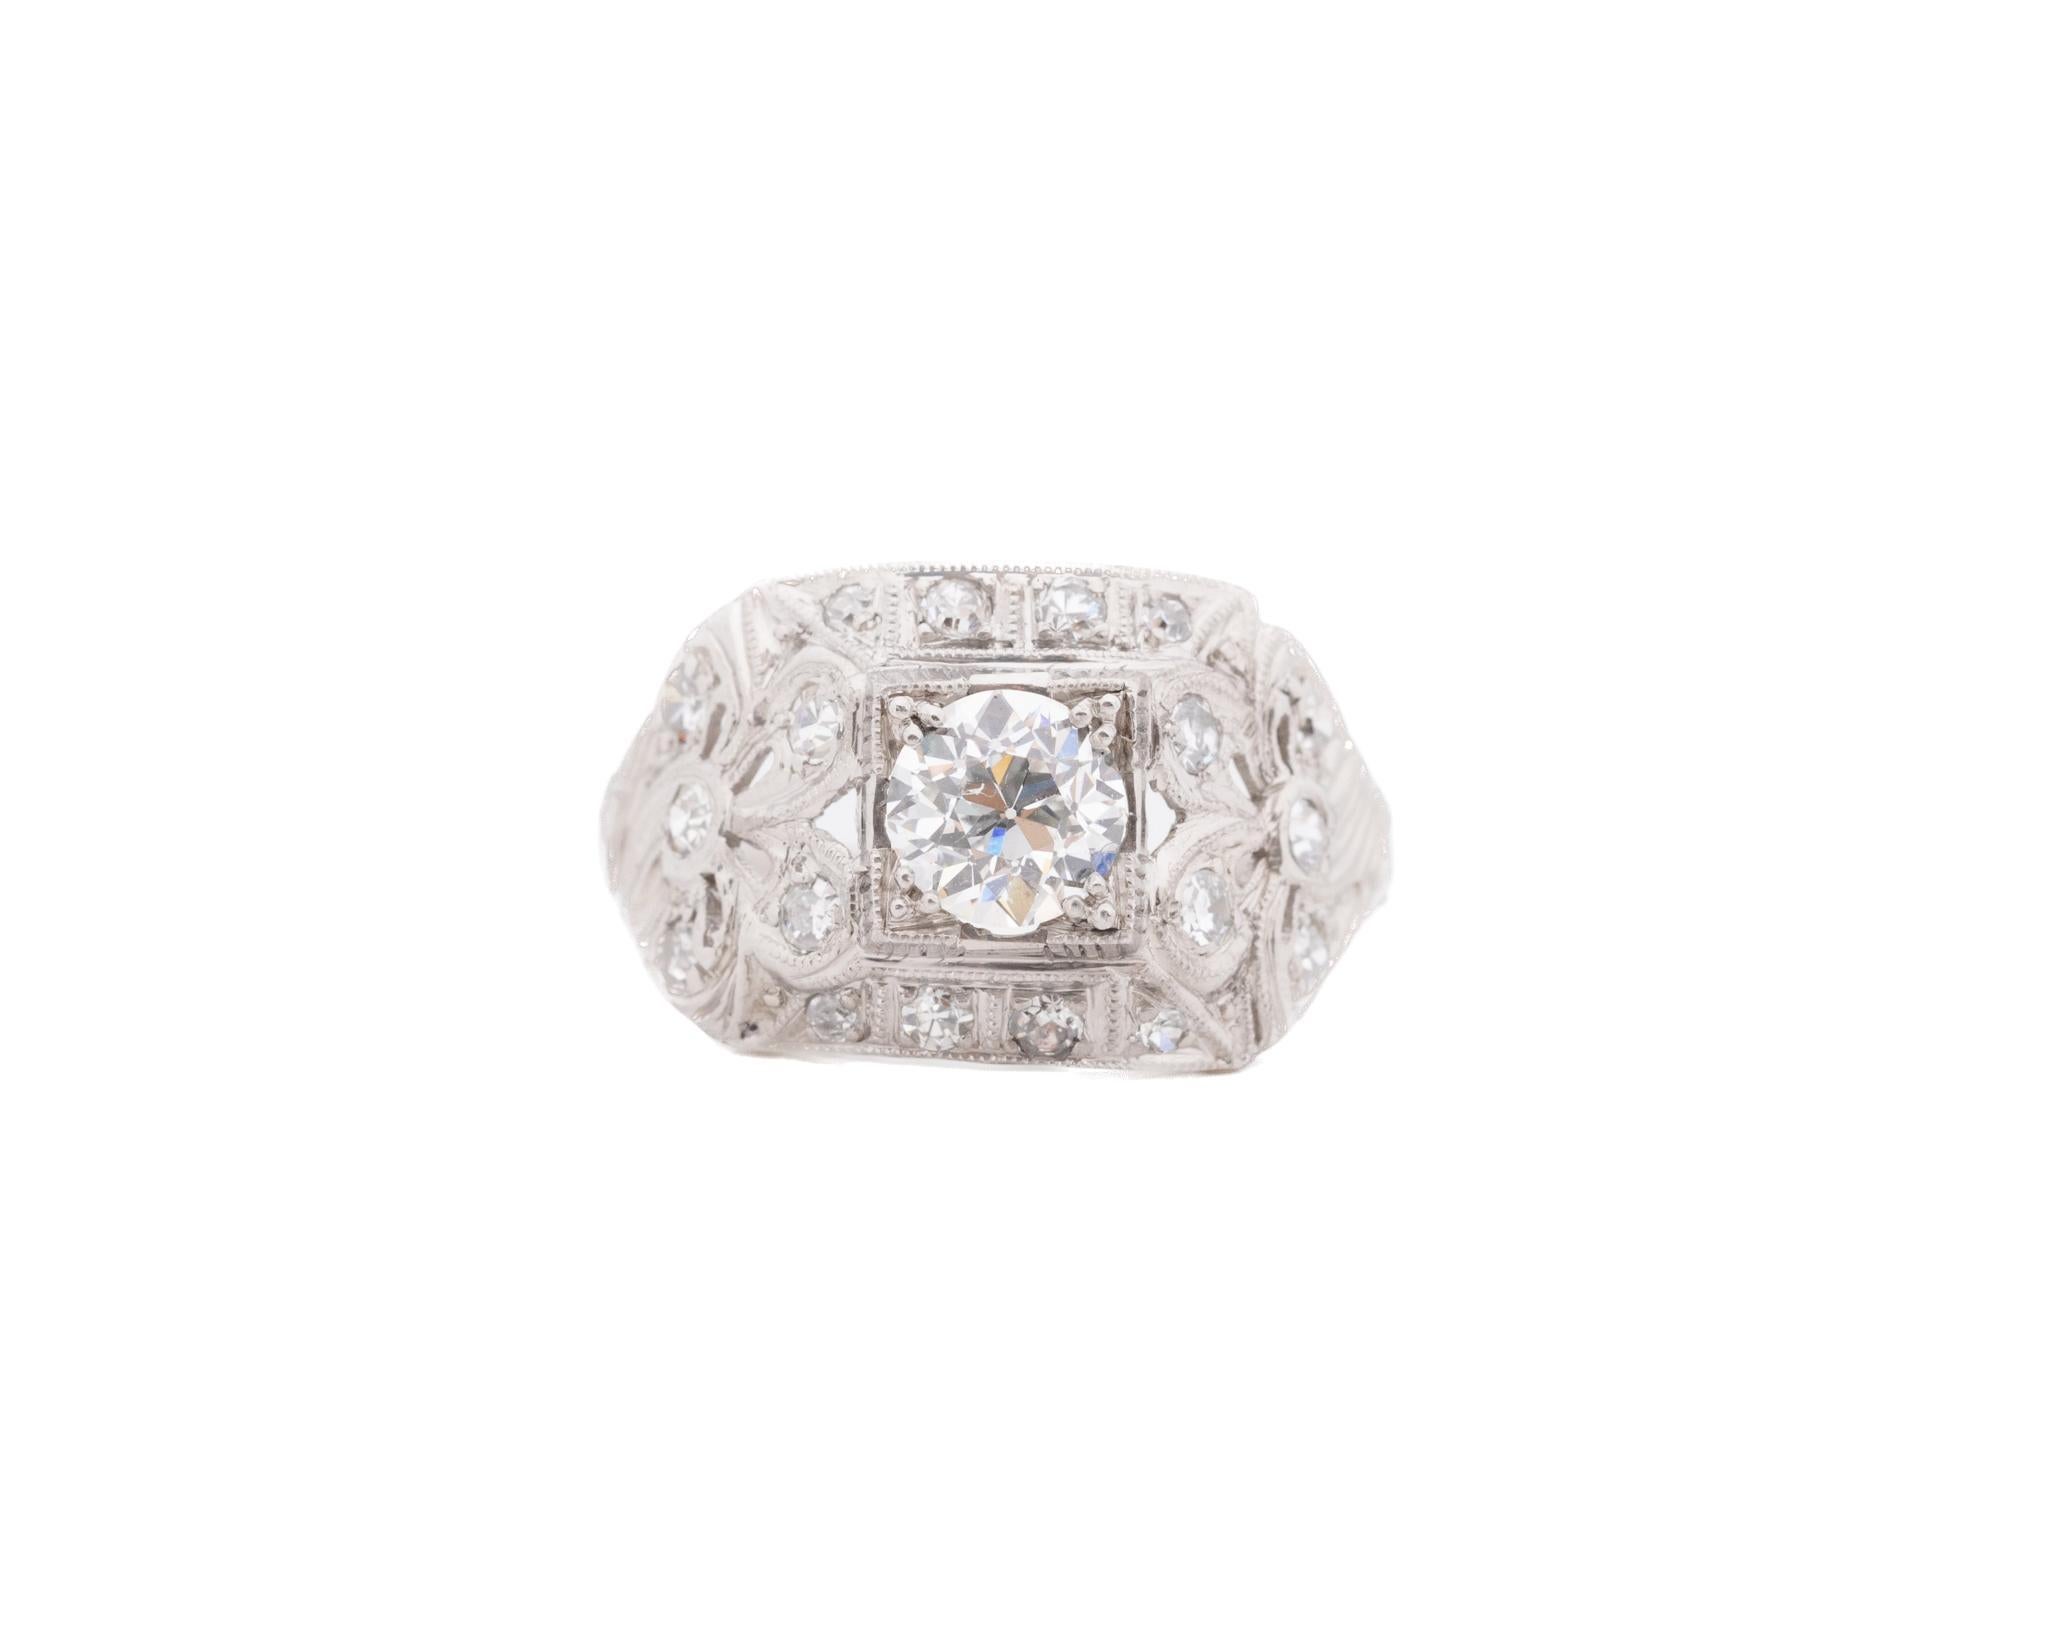 Year: 1930s
Item Details:
Ring Size: 6
Metal Type: Platinum [Hallmarked, and Tested]
Weight: 3.8 grams
Center Diamond Details:
GIA Report#:5234080655
Weight: .69ct total weight
Cut: Old European brilliant
Color: G
Clarity: VS1
Type: Natural
Finger